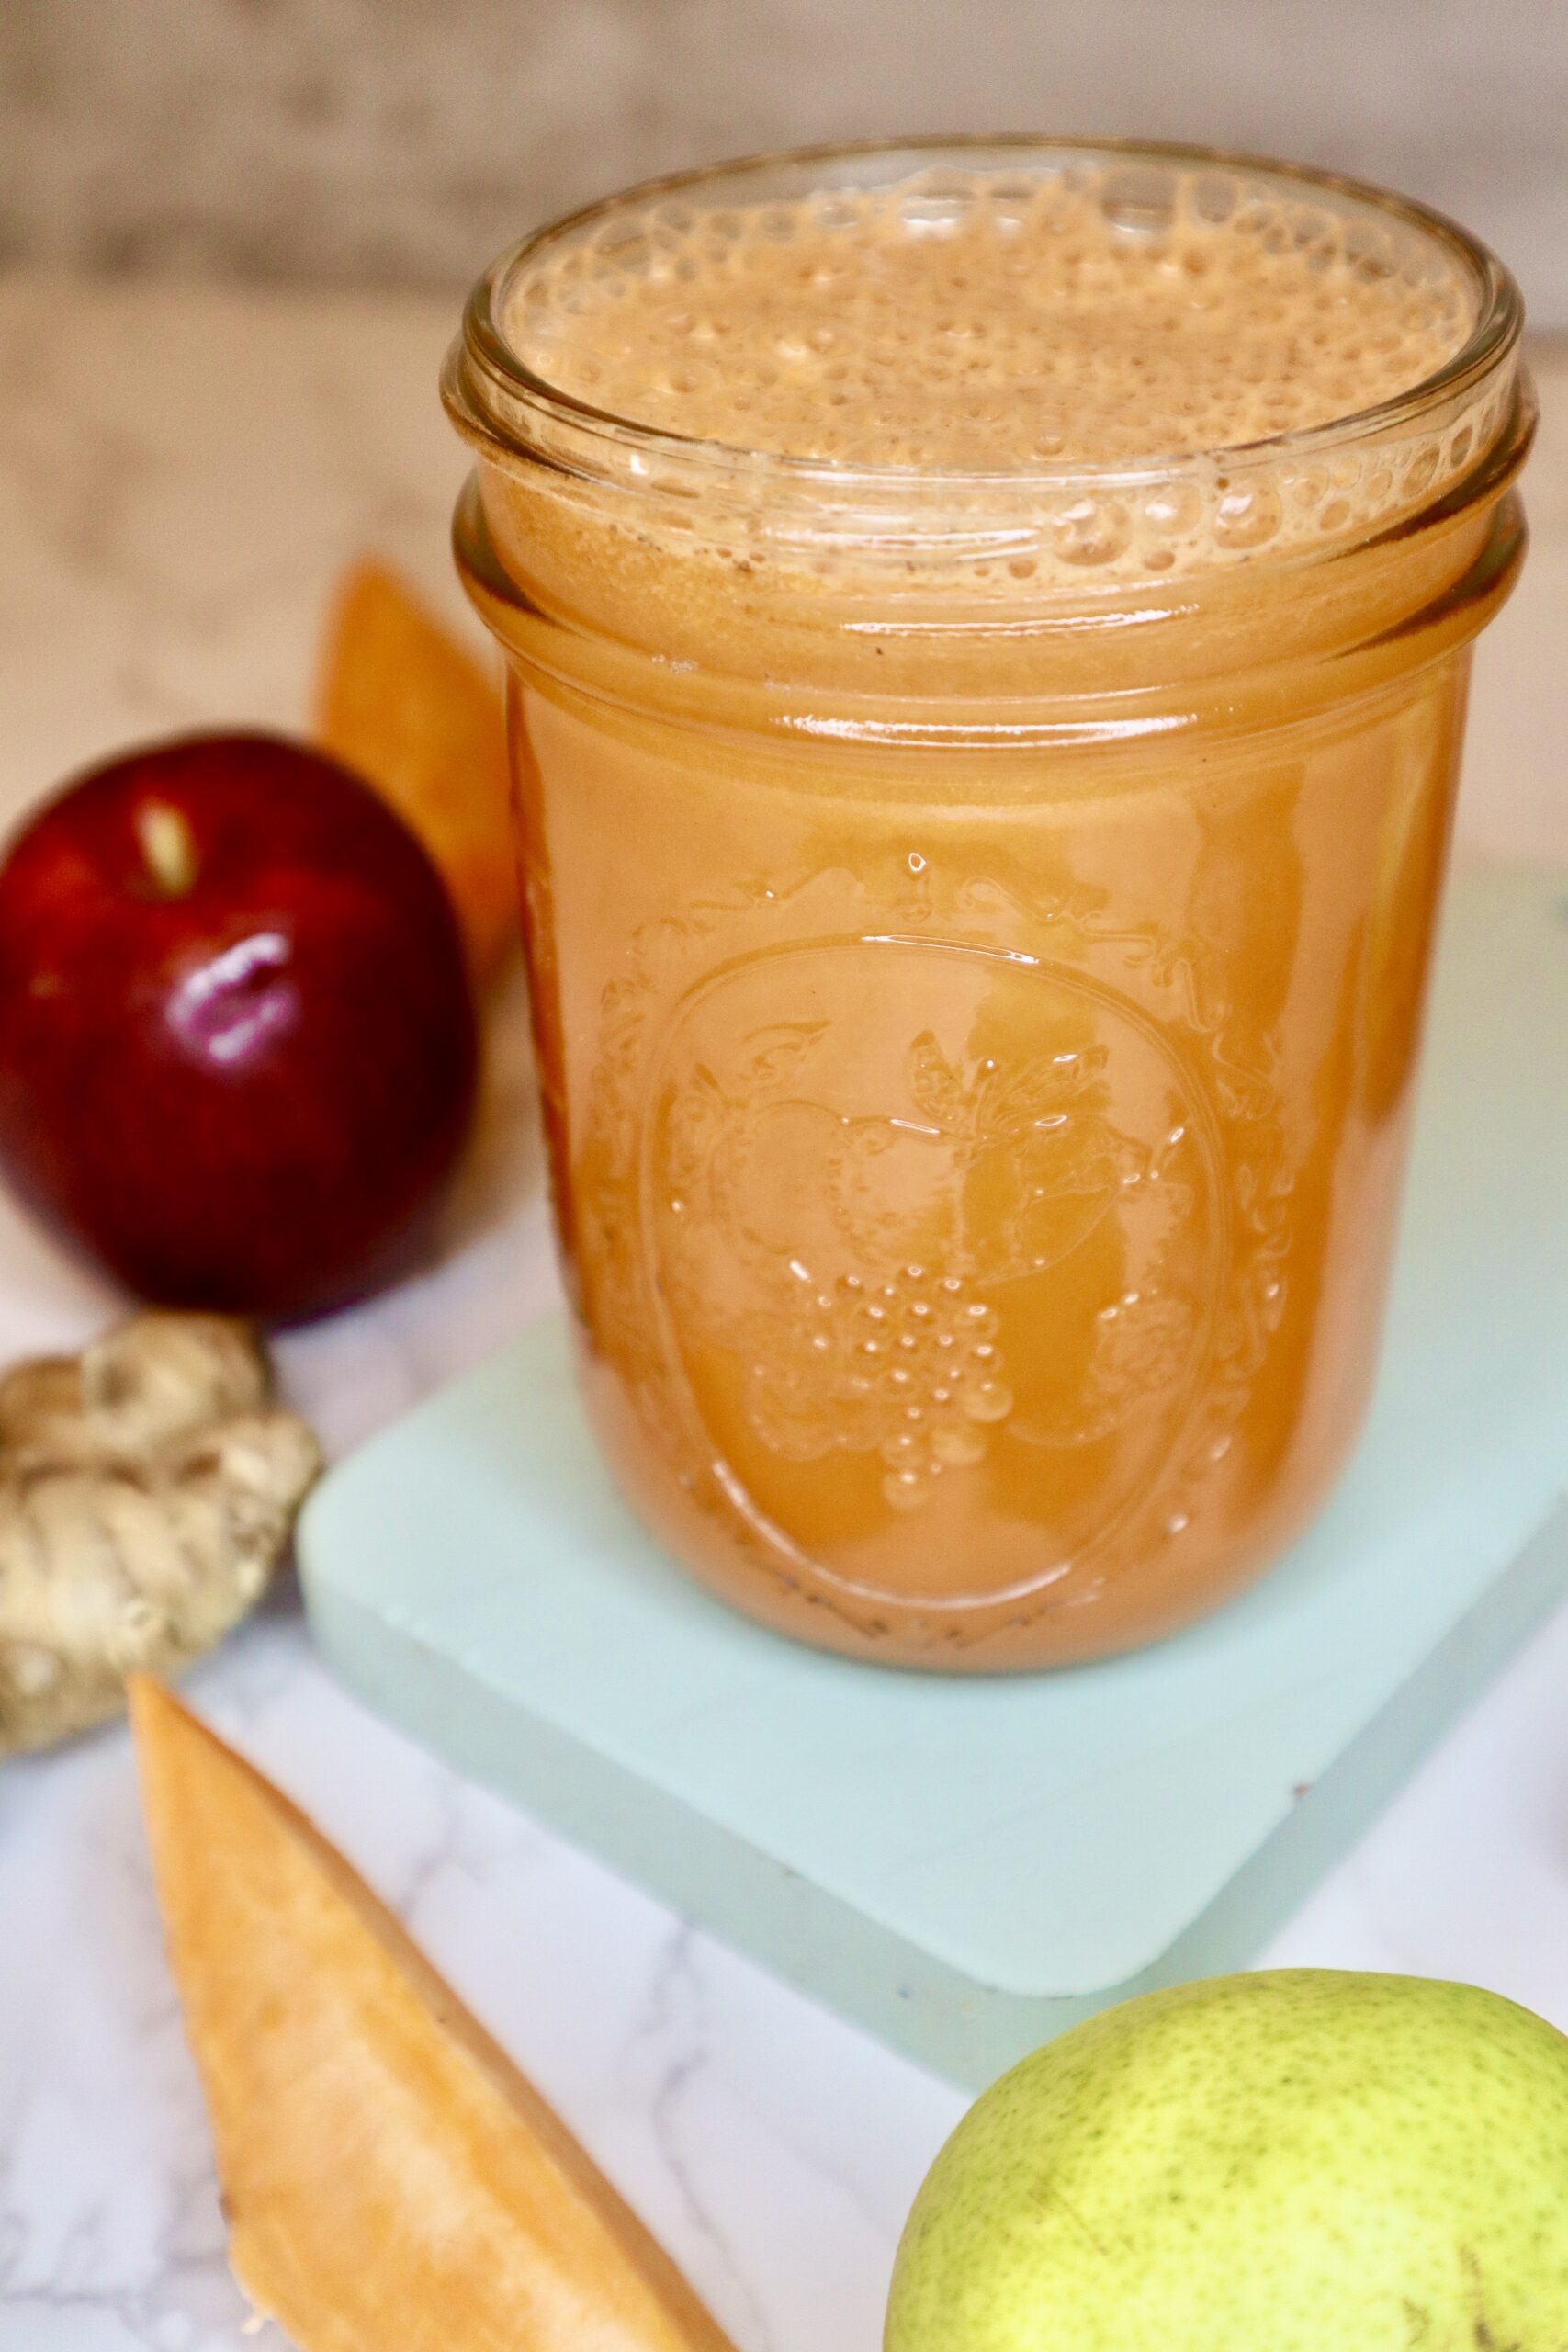 Sweet potato pie juice next to an apple and pear